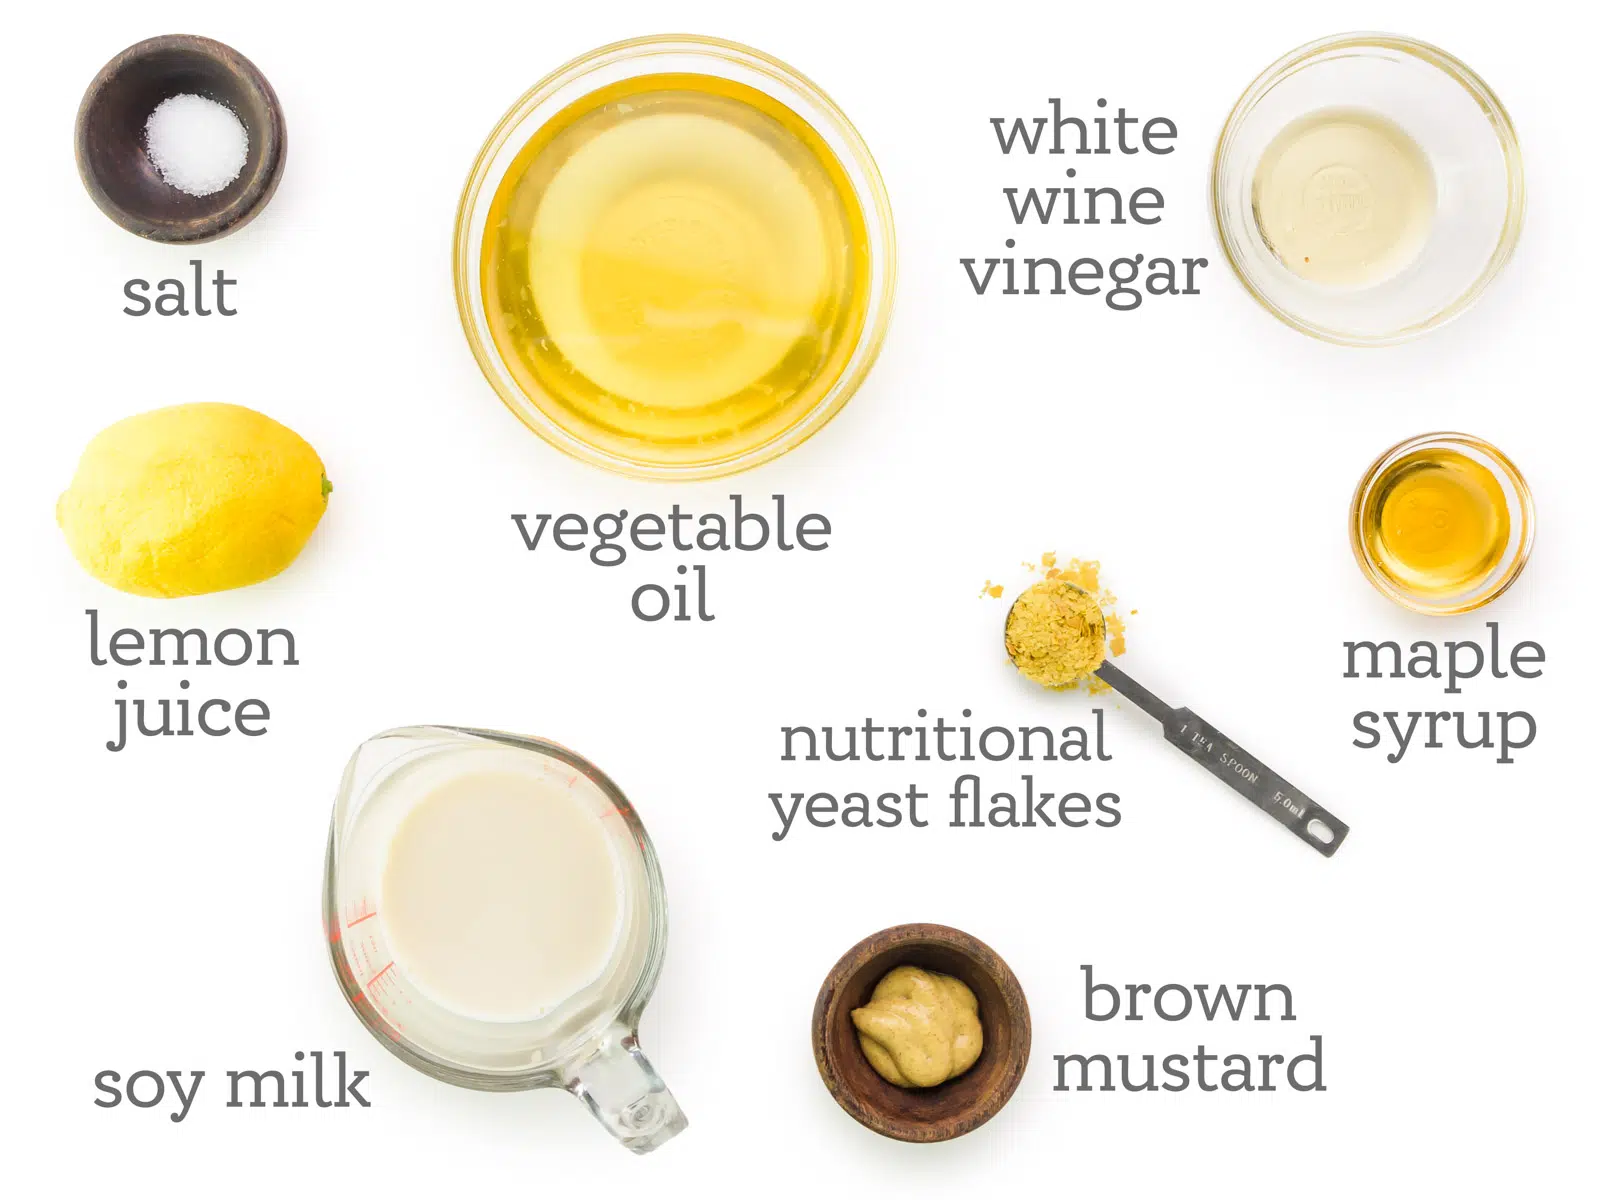 Ingredients are laid out on a table. The following text is listed next to the ingredients, white wine vinegar, maple syrup, nutritional yeast flakes, brown mustard, soy milk, lemon juice, salt, and vegetable oil.